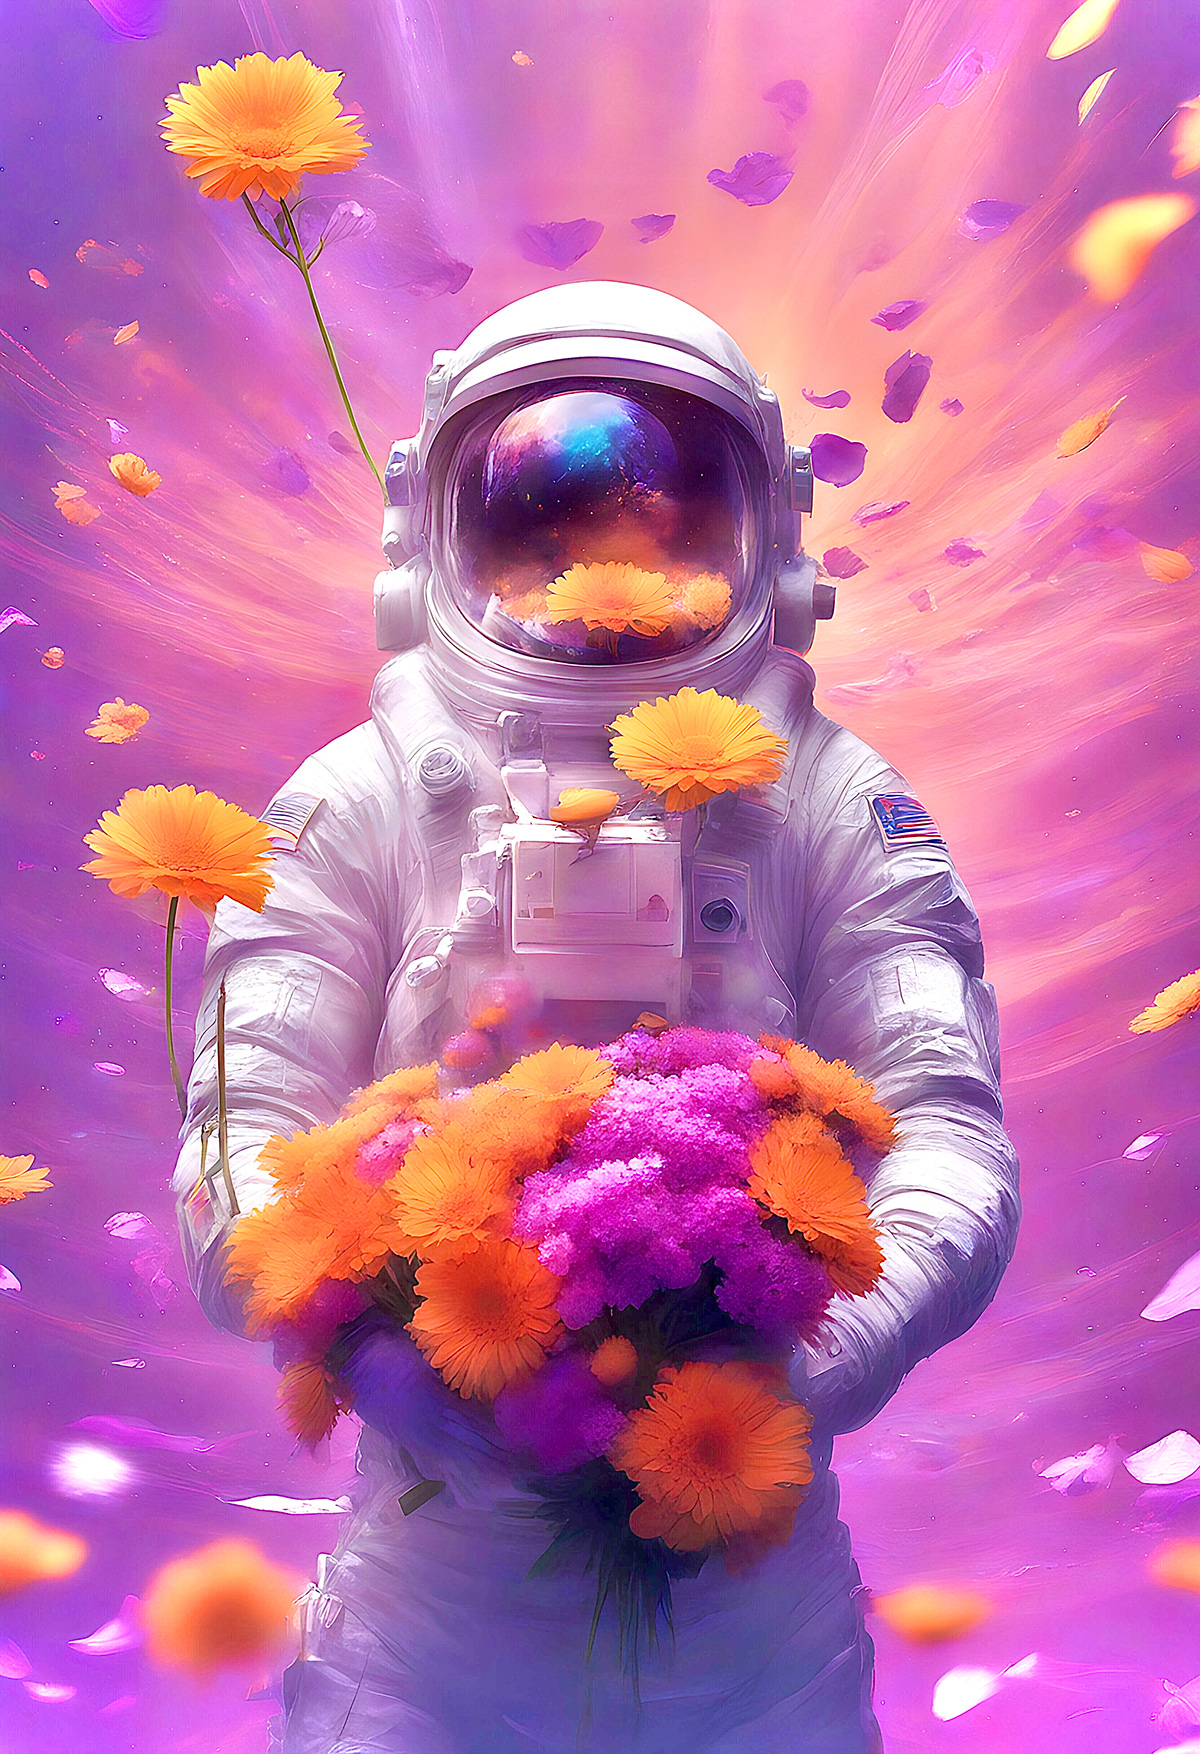 Synthwave retrowave astronaut Flowers dream anxiety Insomnia depression Schizophrenia bipolar mental health mental illness ai Ai Art aiart space travel alien world dreamscape AI assisted other world